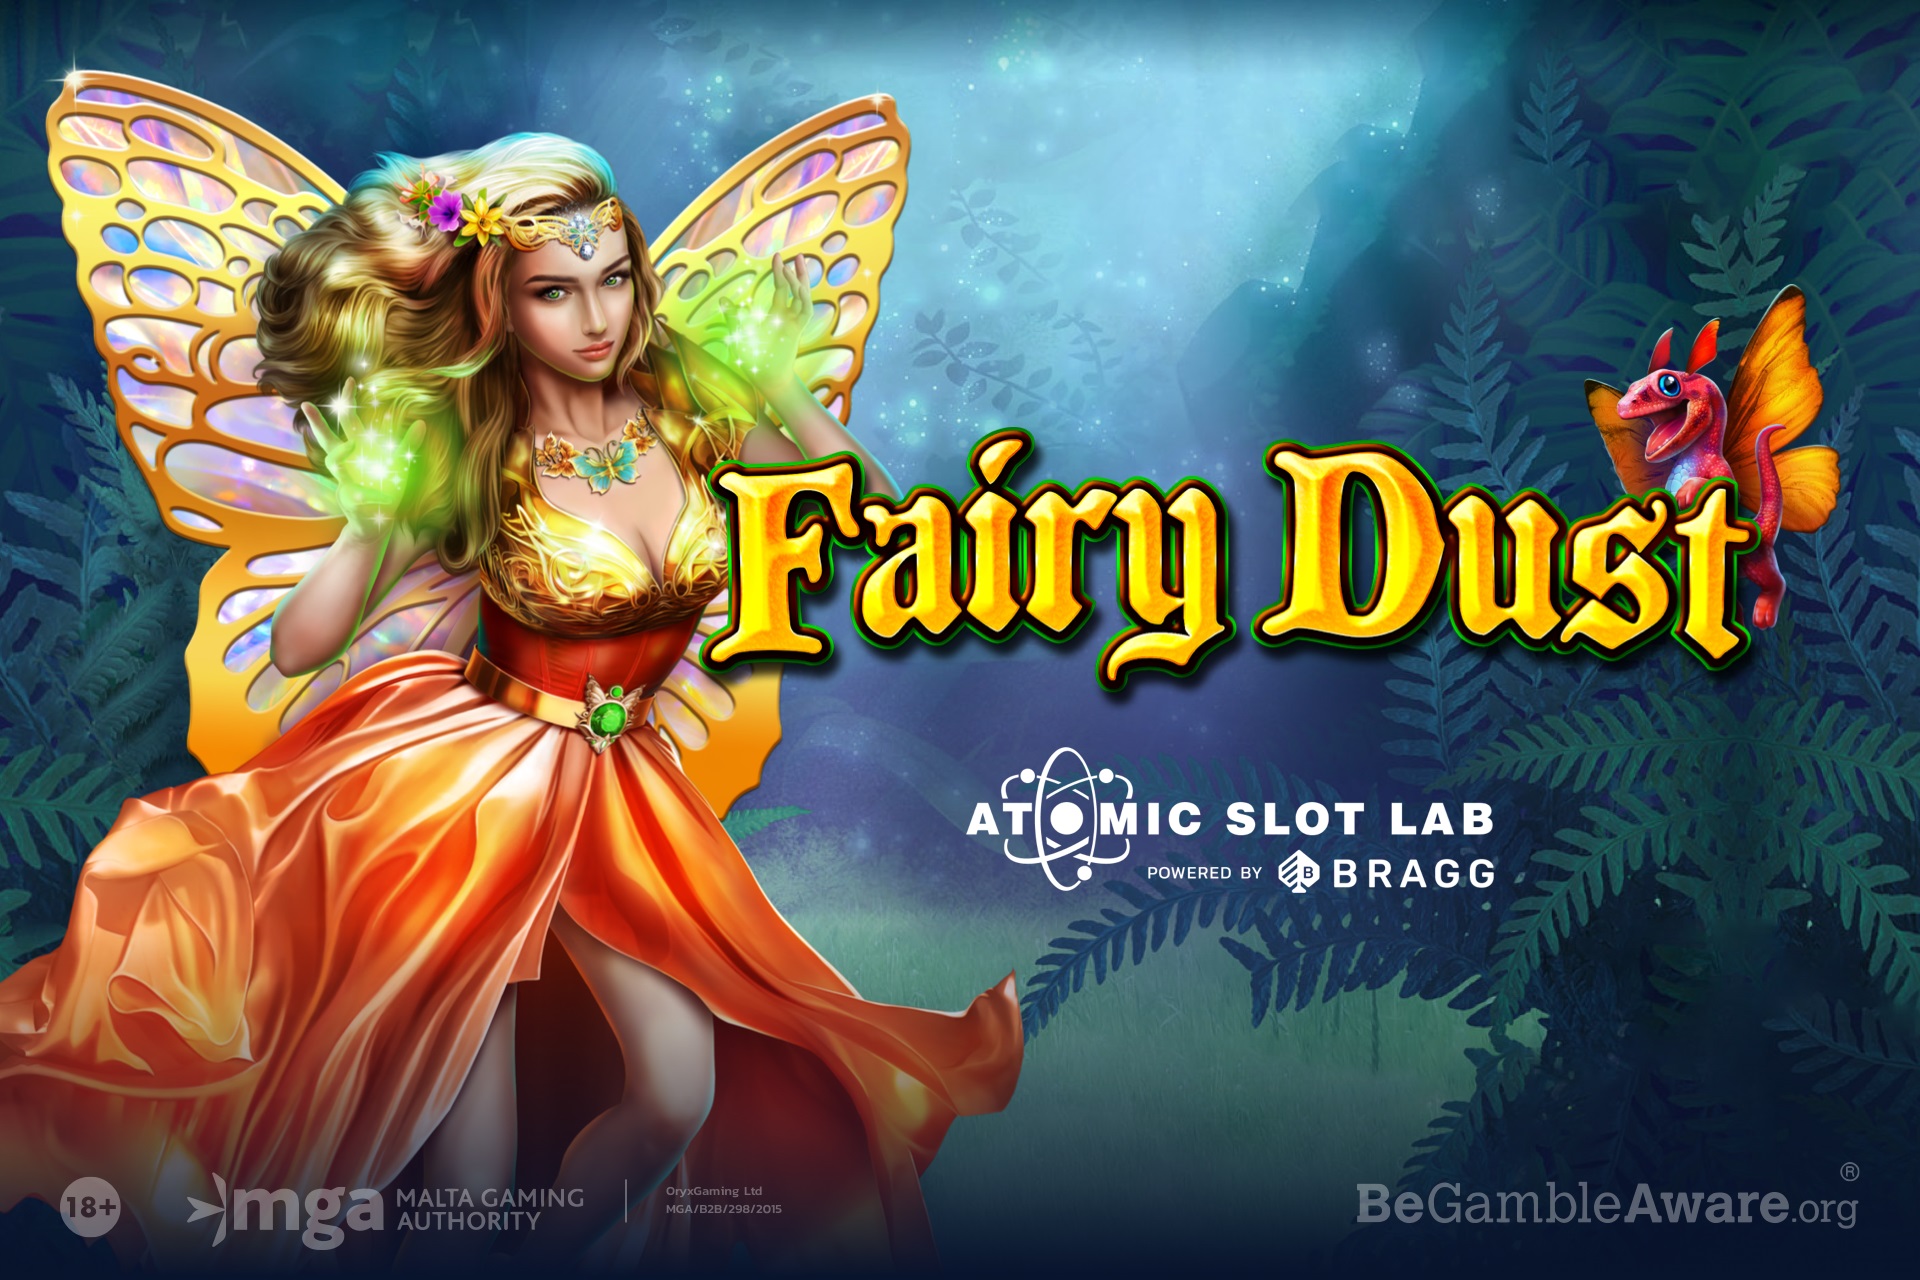 NEW GAME $25 BET BIG WIN FAIRY DUST 20 FREE SPINS - HARD ROCK TAMPA HIGH LIMIT 5cents Denom